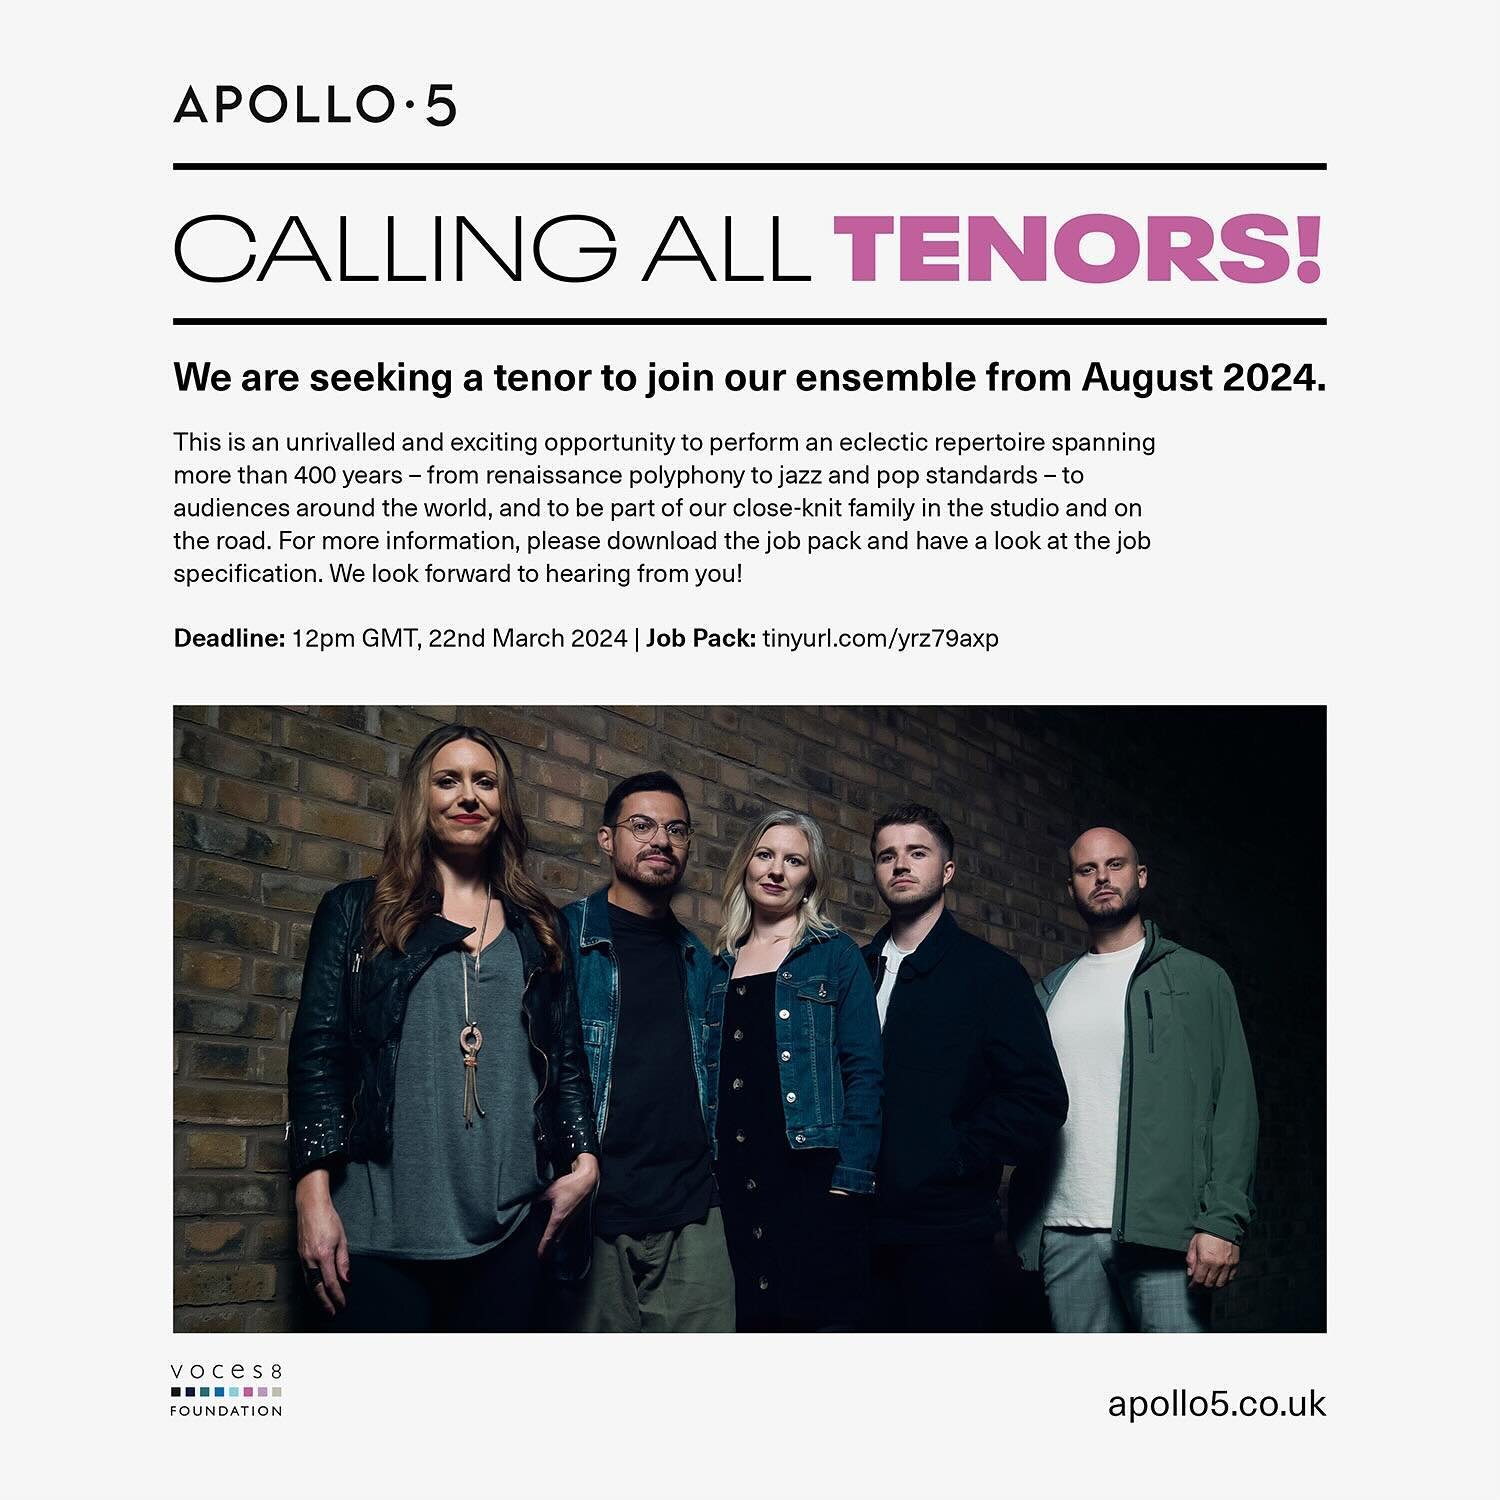 *Drum roll please&hellip;* 🥁 

Applications are now open for our new TENOR VACANCY. Head over to the link in our bio to download the job pack; we look forward to hearing from you! 

#acapella #acappella #choral #singing #musicjob #singingjob #musico